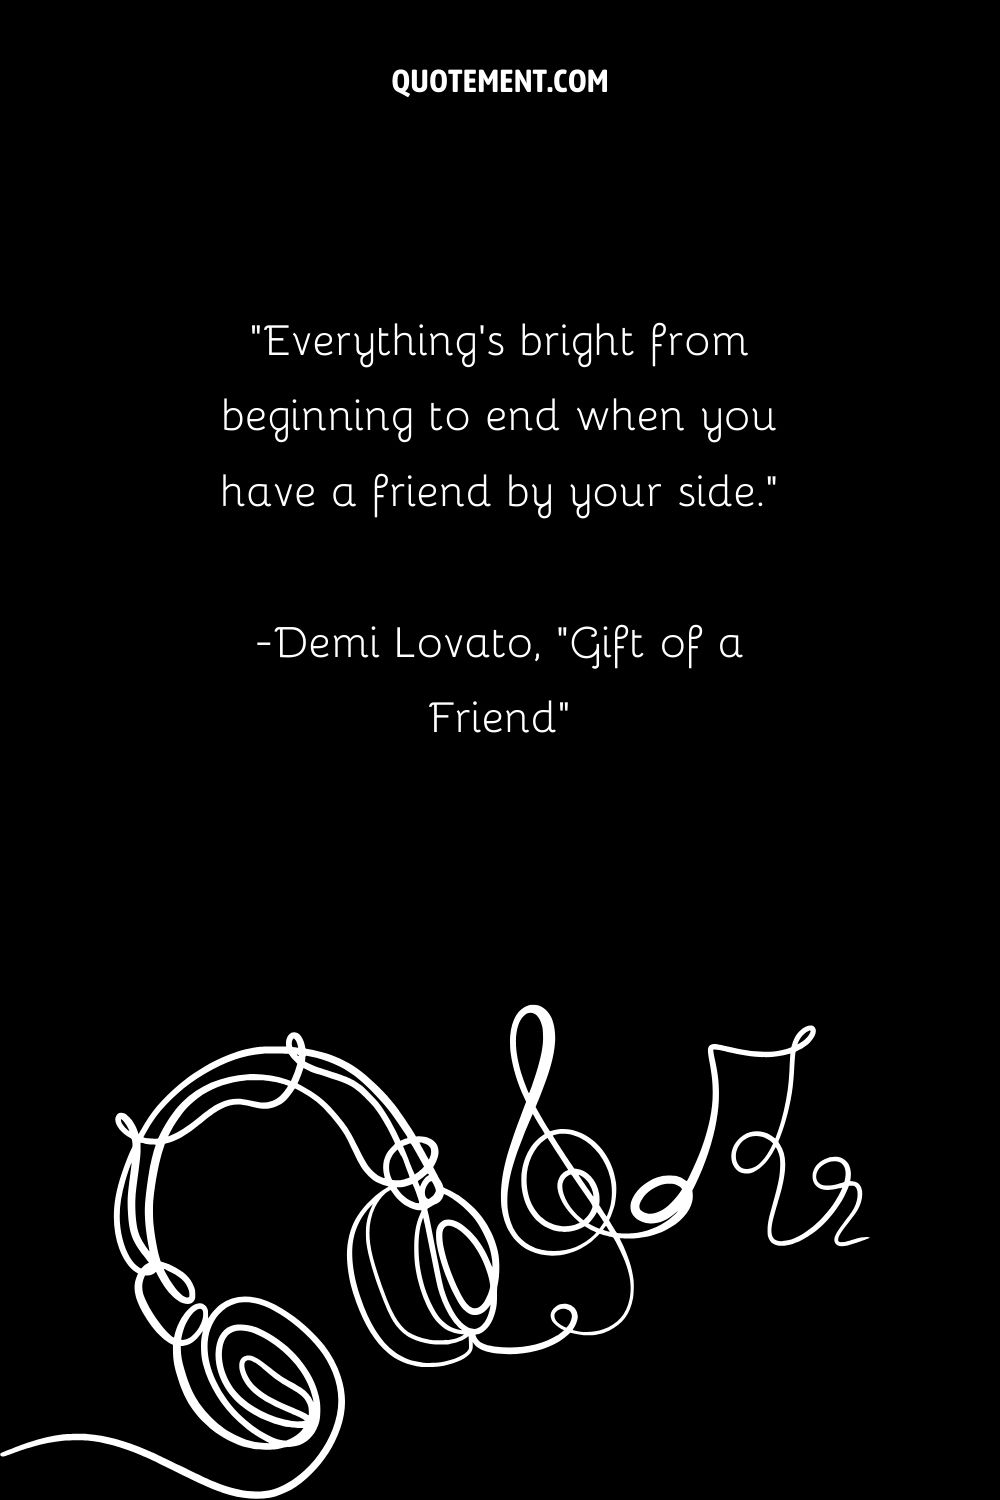 Everything's bright from beginning to end when you have a friend by your side.” — Demi Lovato, Gift of a Friend